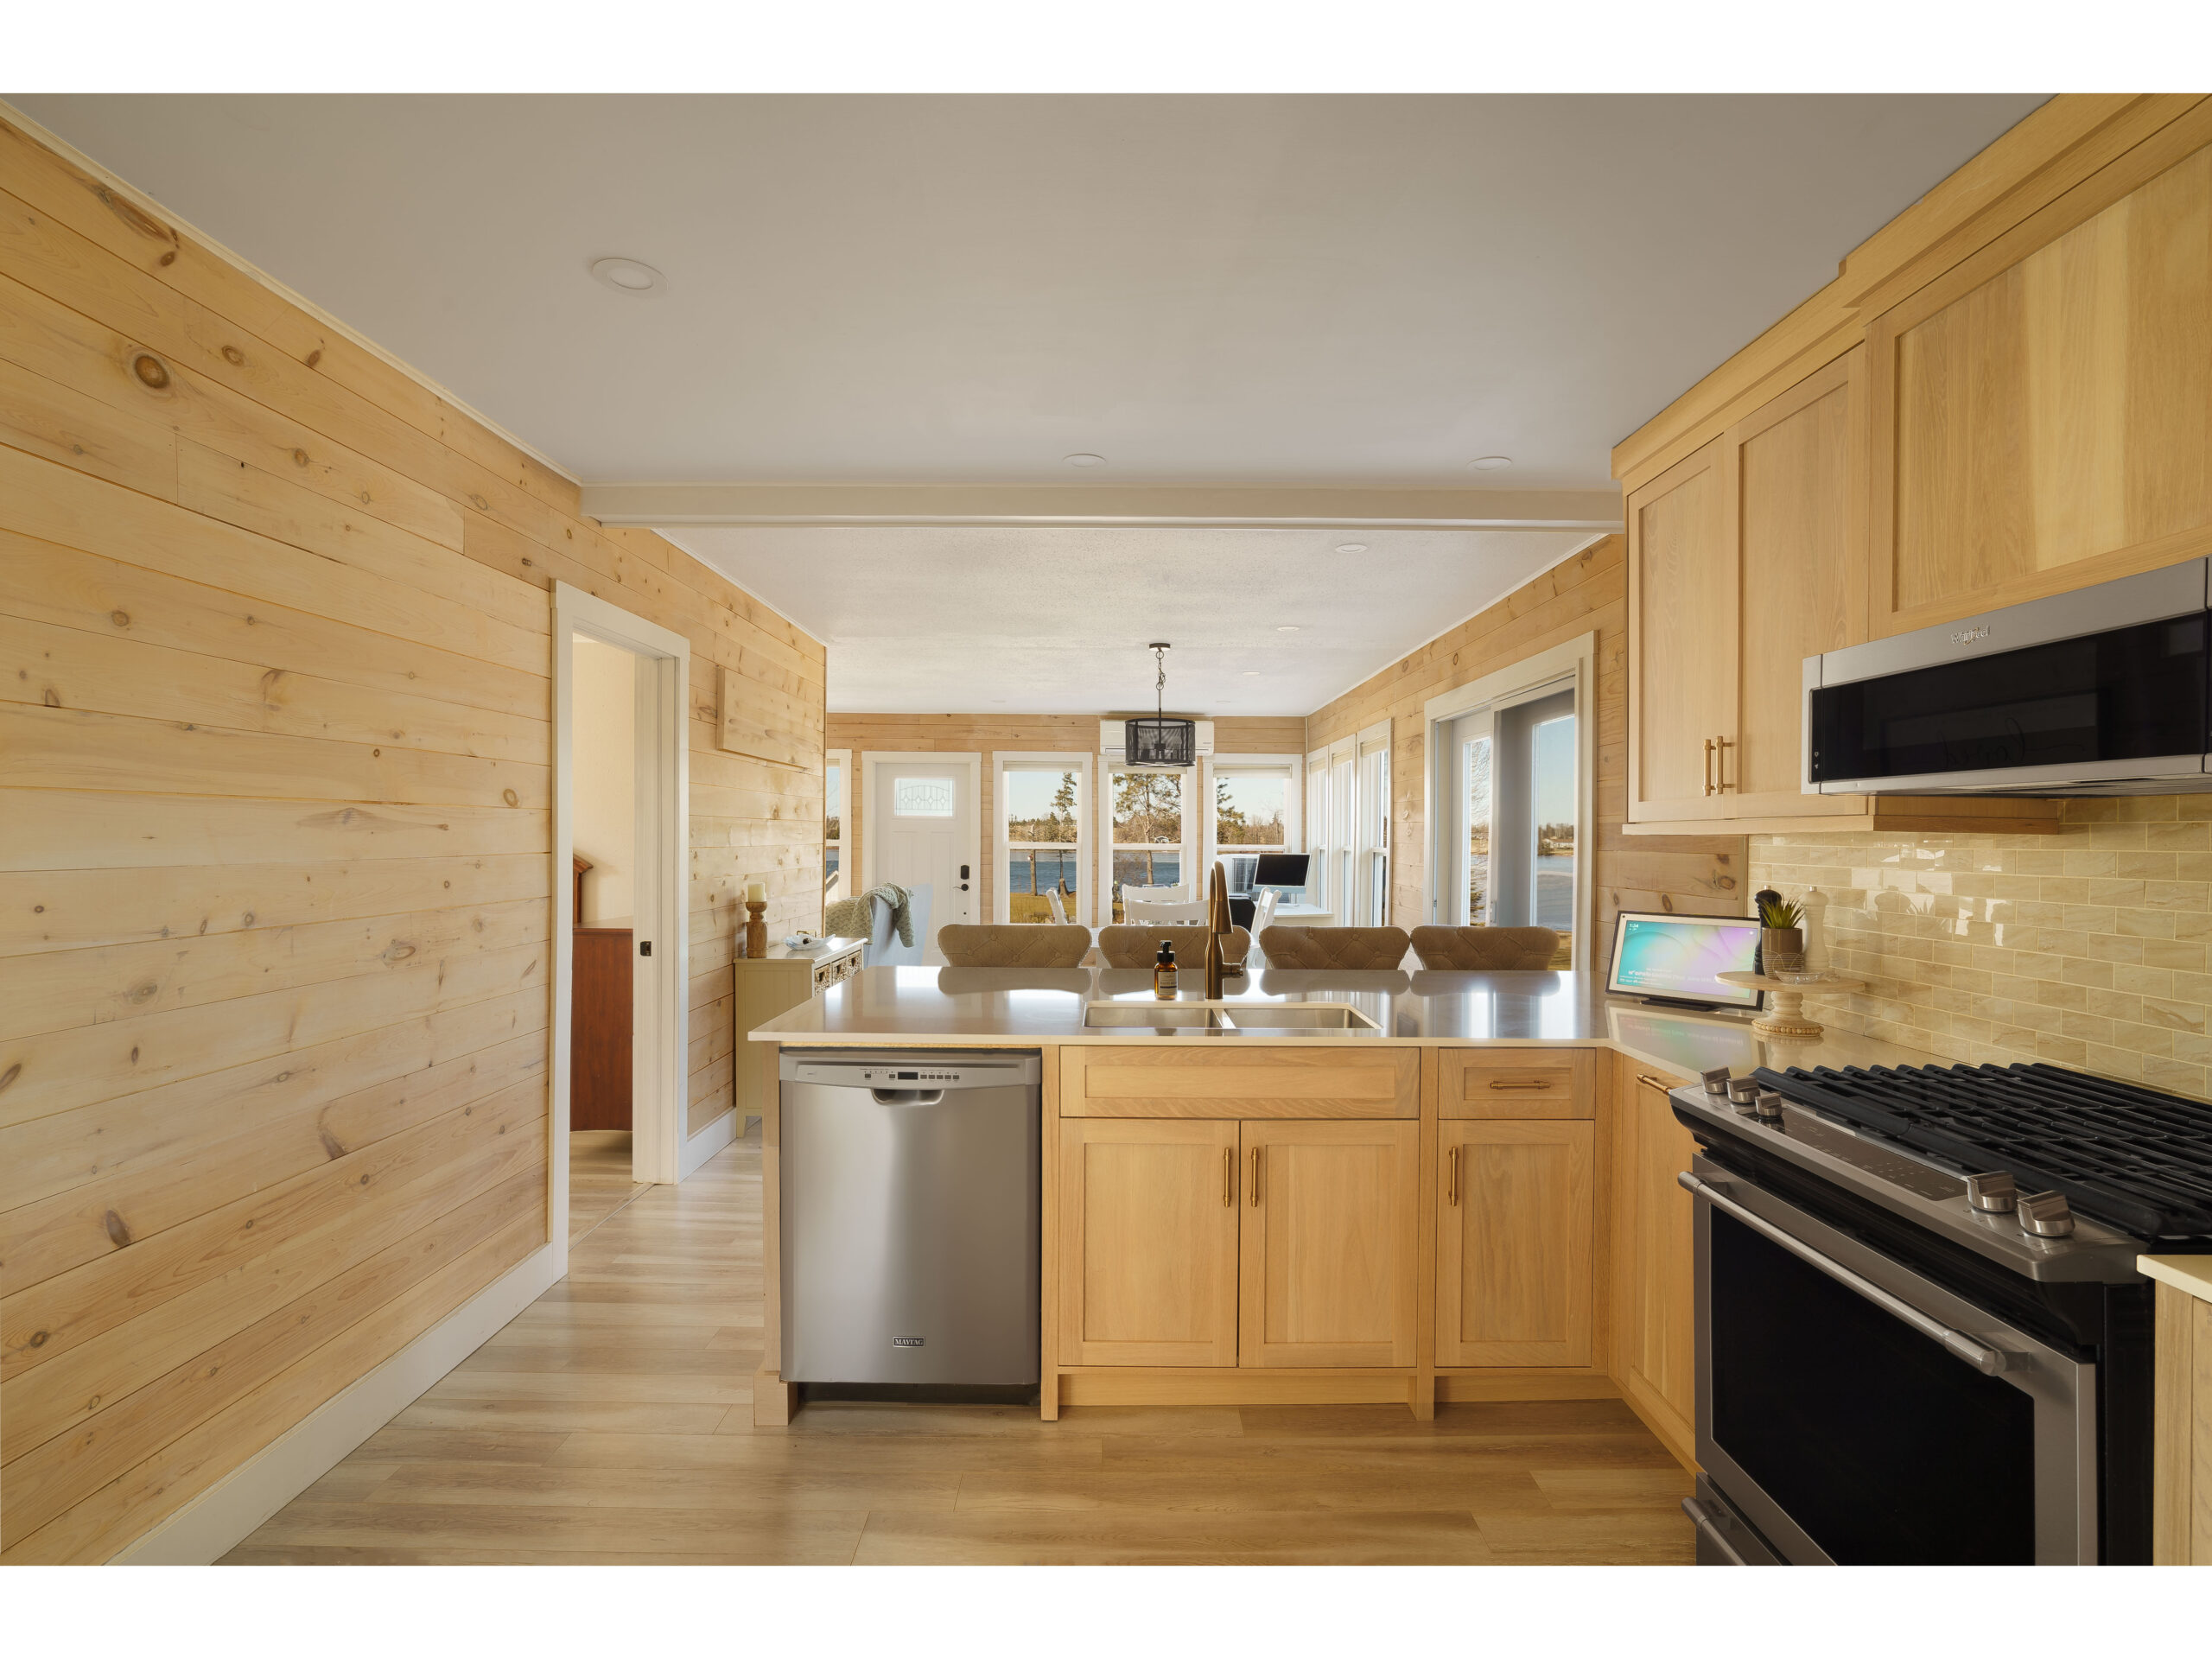 A small but open kitchen with a large peninsula and barstools, wooden cabinets that match the wood-panelled wall, and stainless steel appliances.